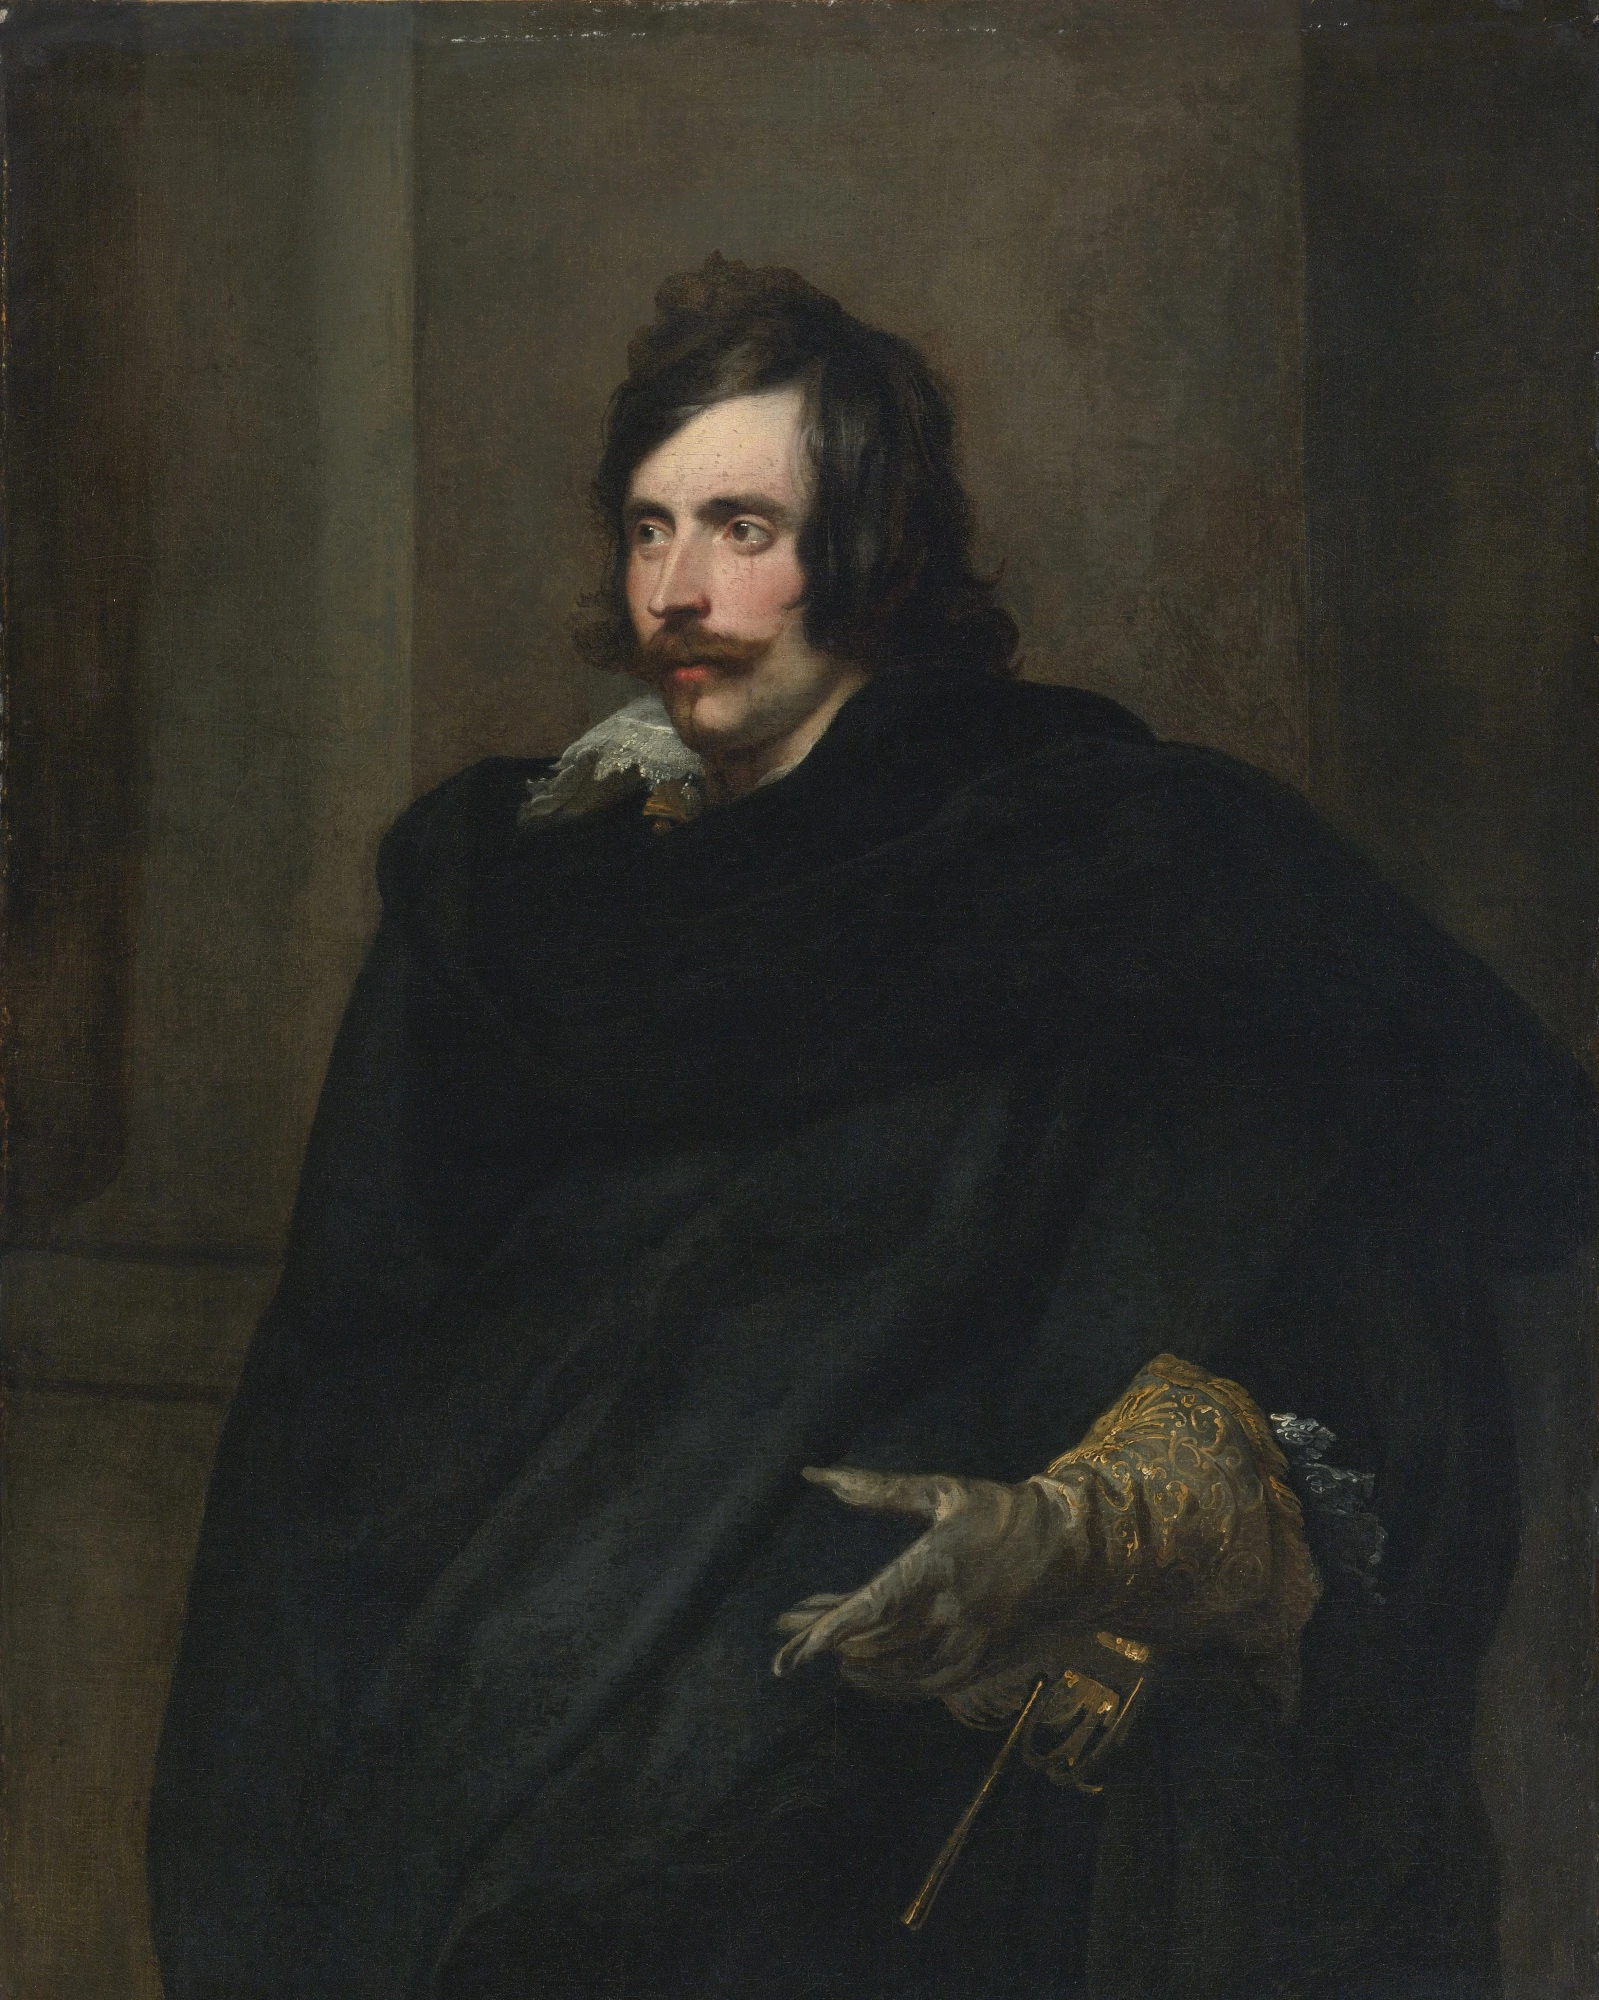 Portrait of a Man with a Gloved Hand, Anthony van Dyck